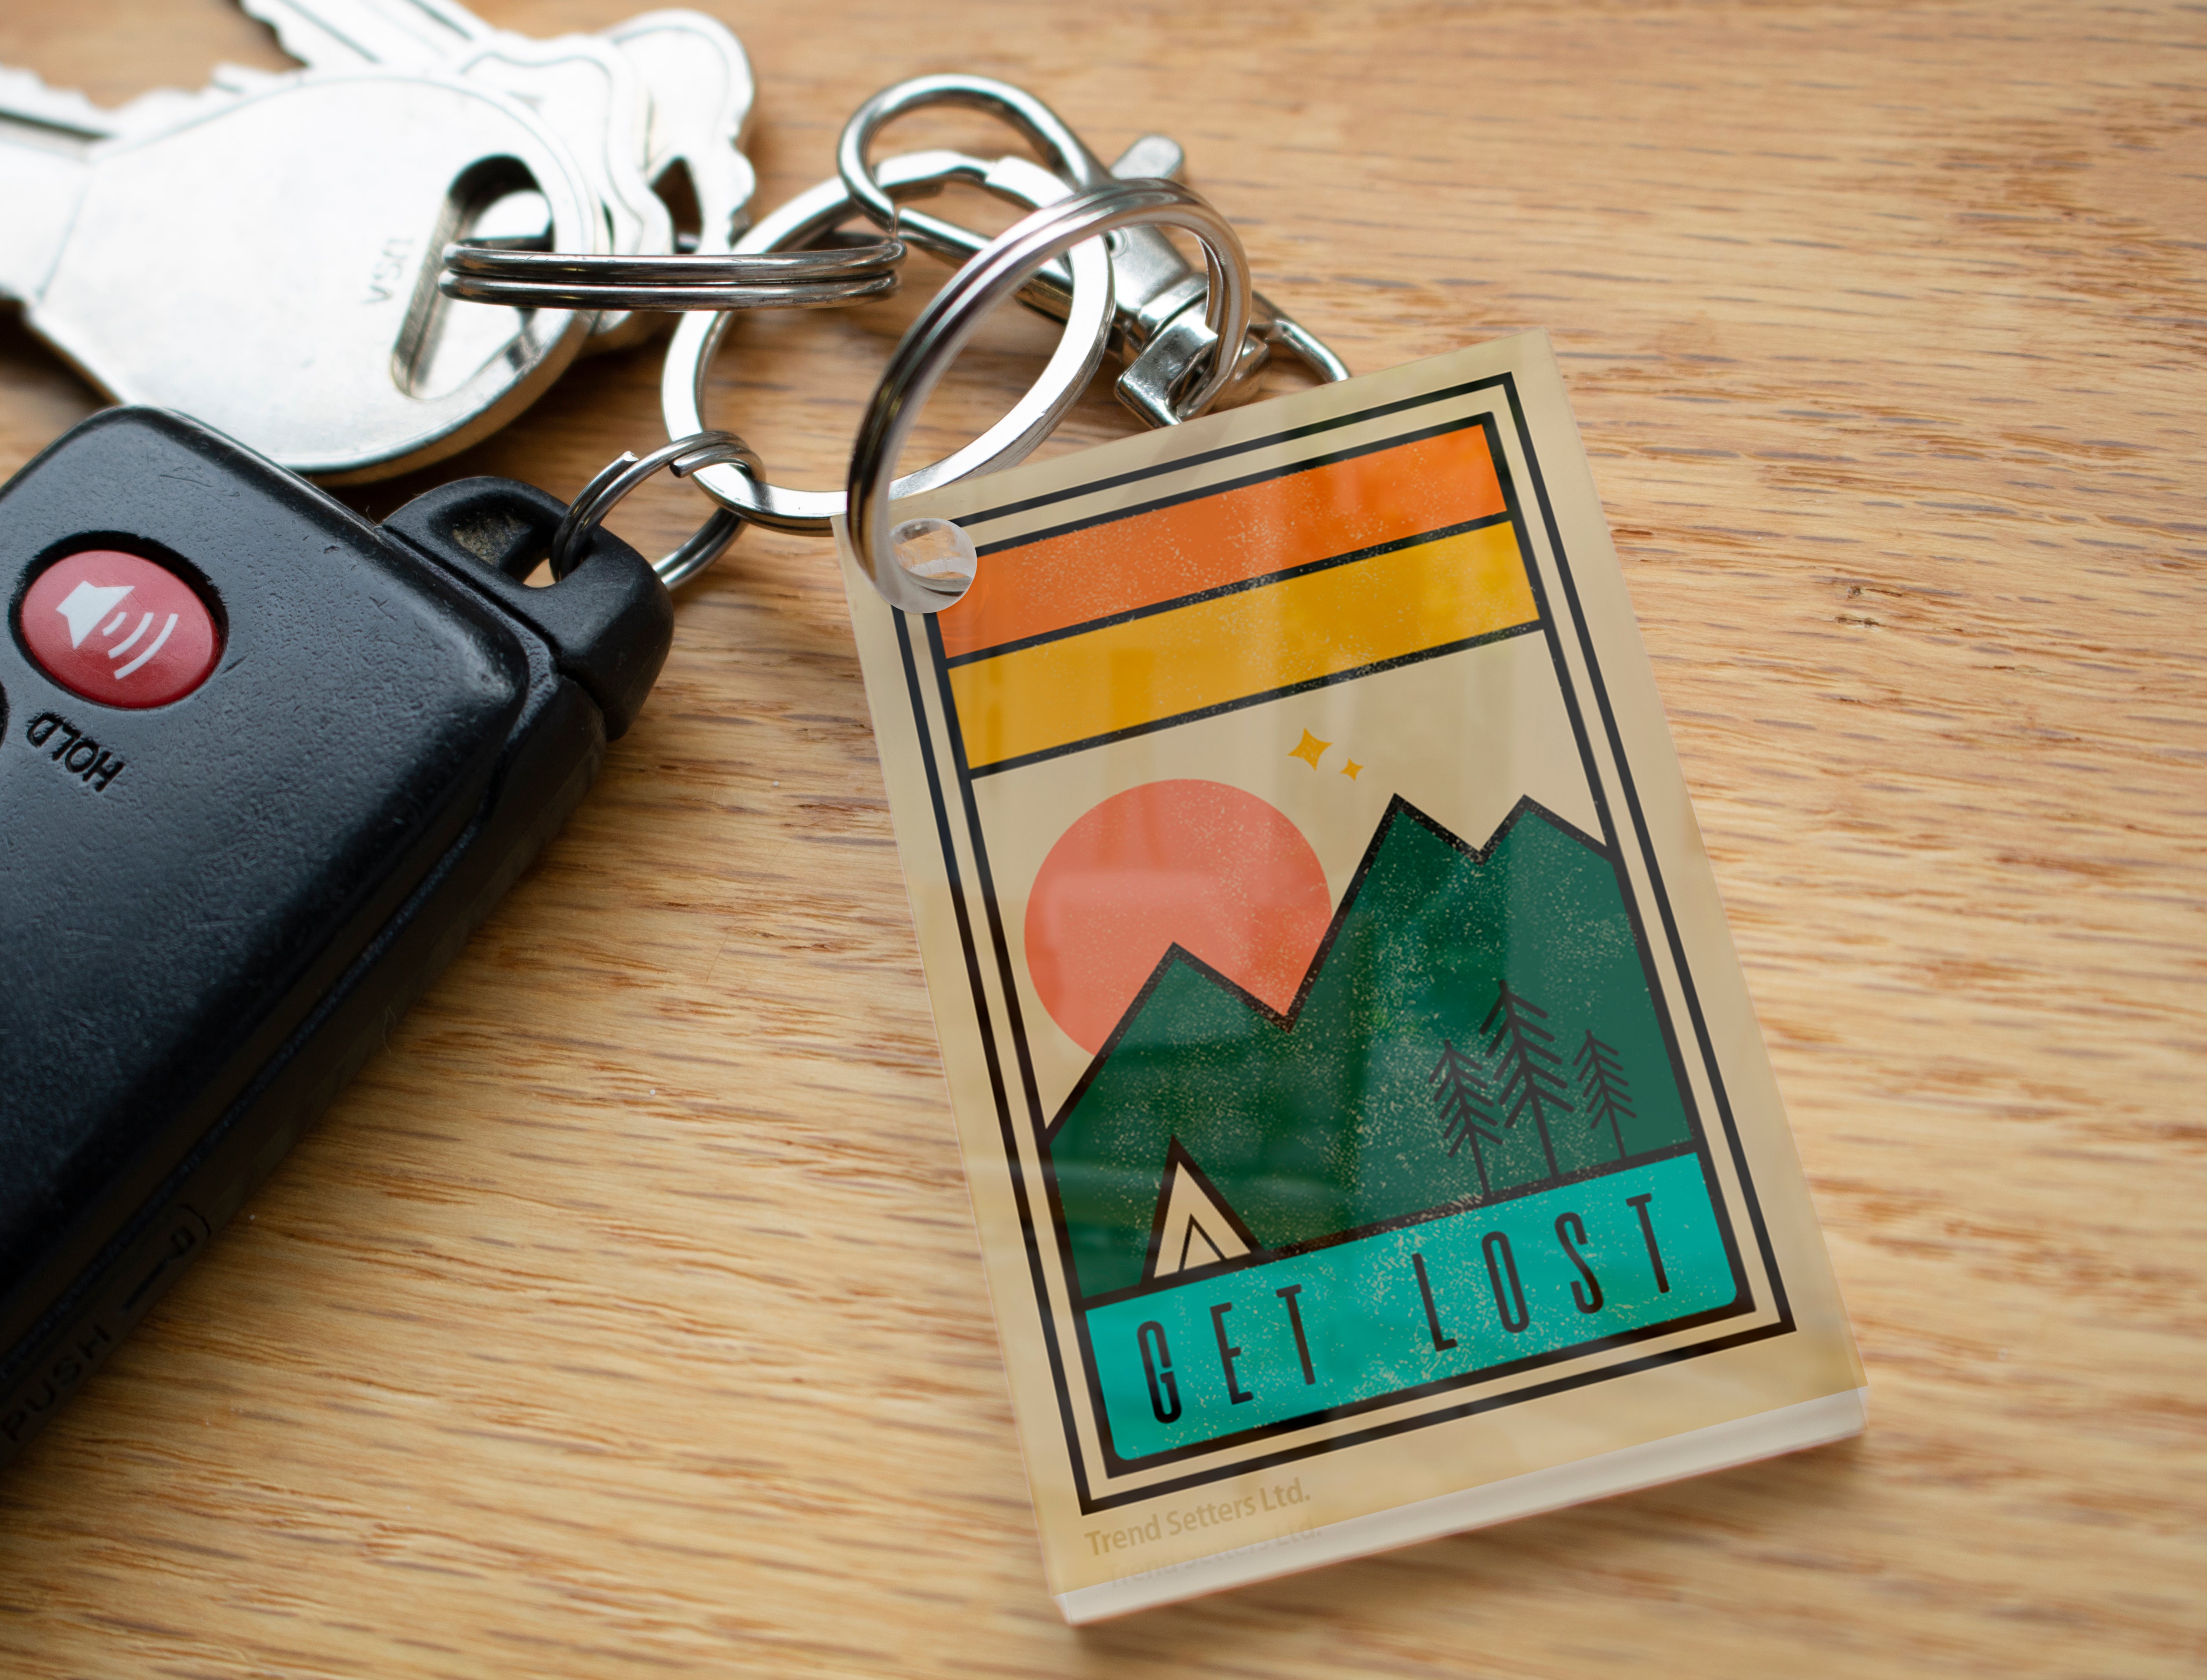 Trend Setters Original (Get Lost) Acrylic Keychain